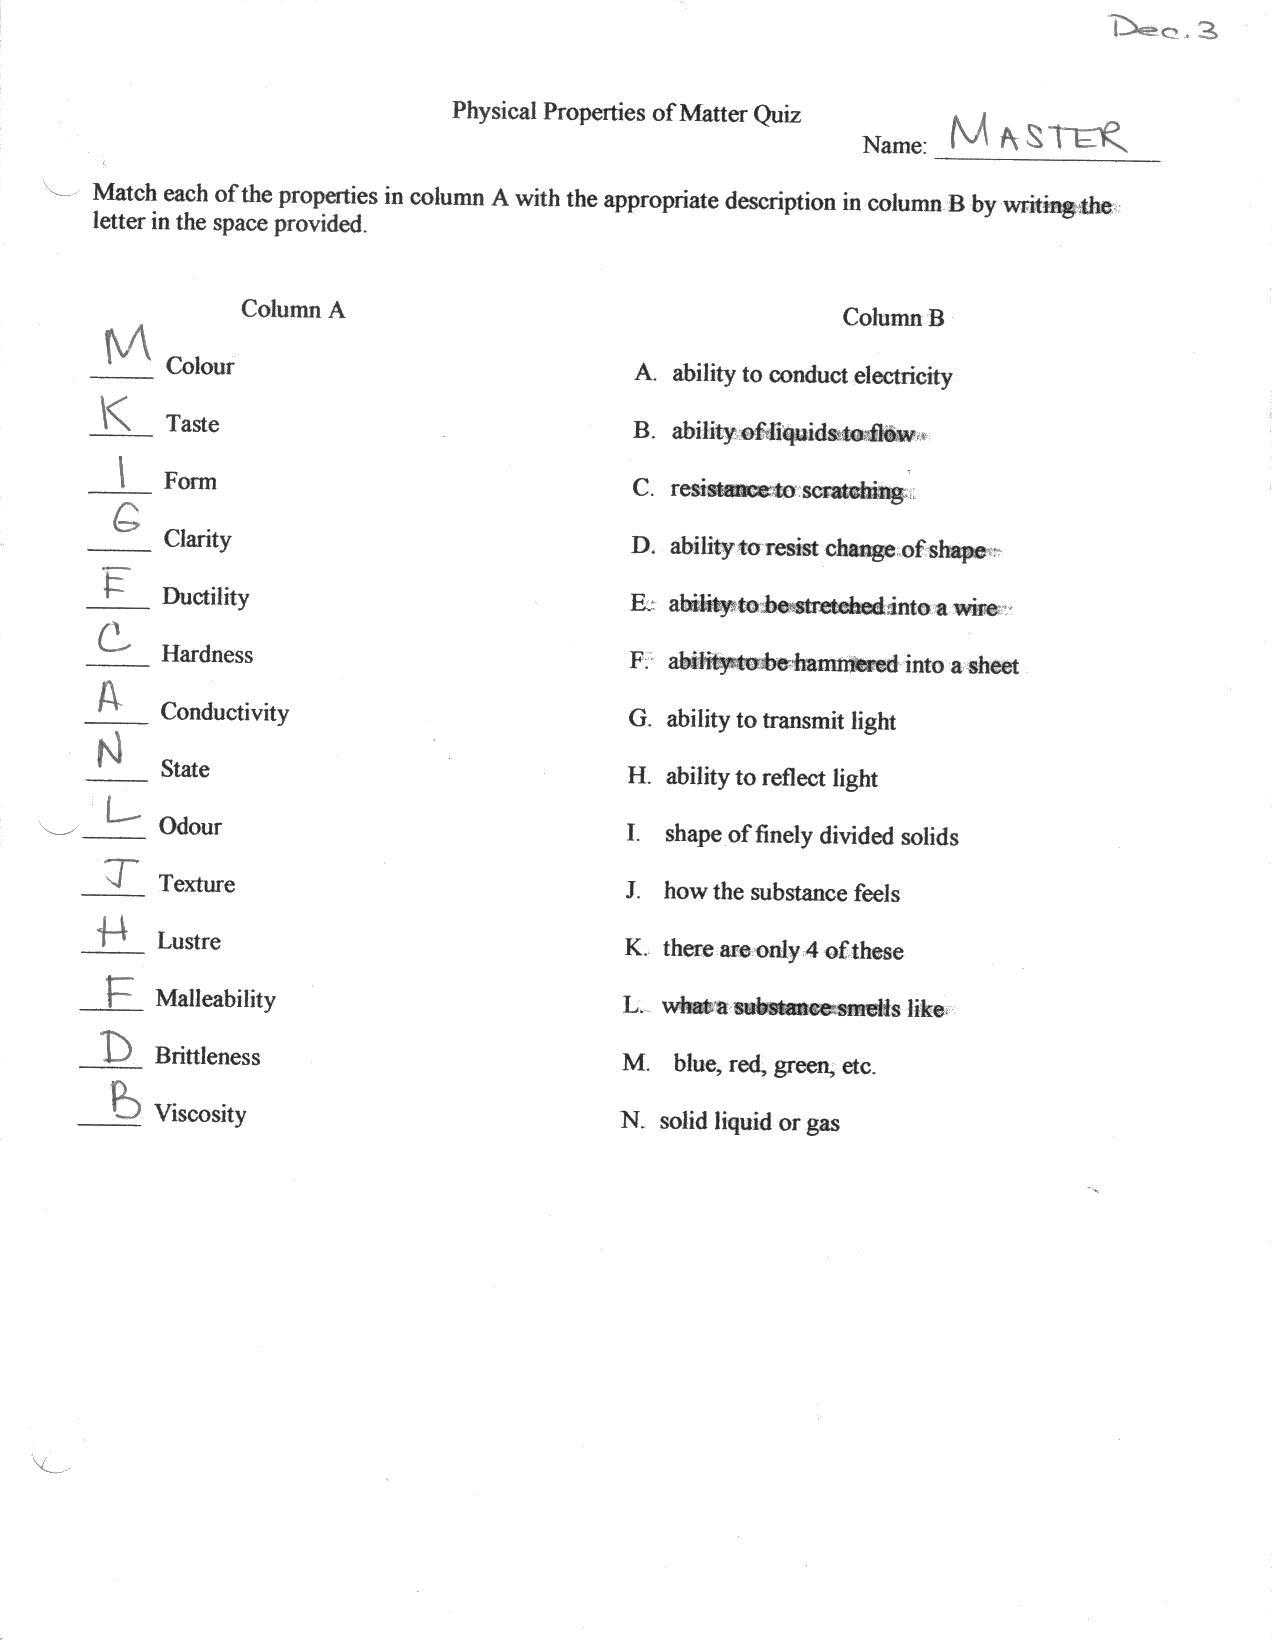 Counting atoms Worksheet Answers together with Properties Matter Crossword Puzzle Pdf Design Basic atomic